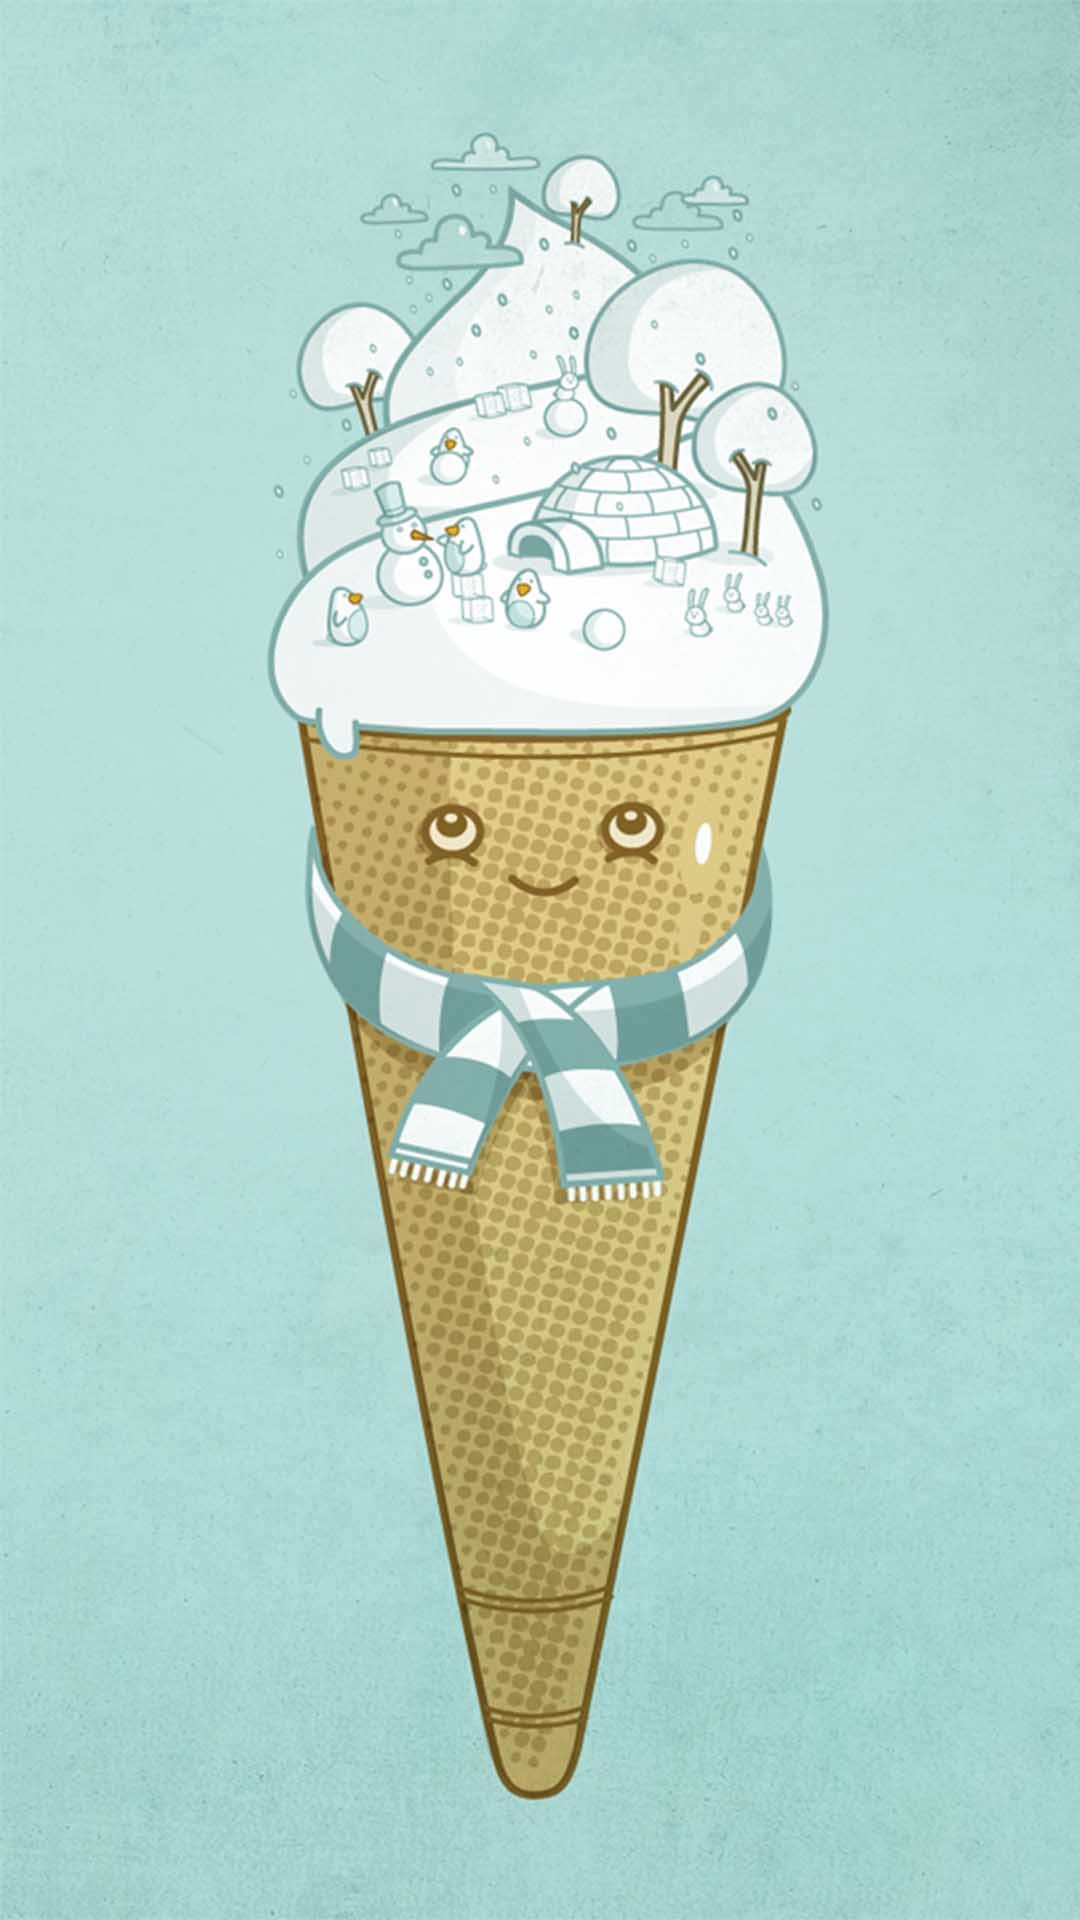 Tap image for more cute funny iPhone wallpaper! Ice cream – @mobile9 |  Wallpapers